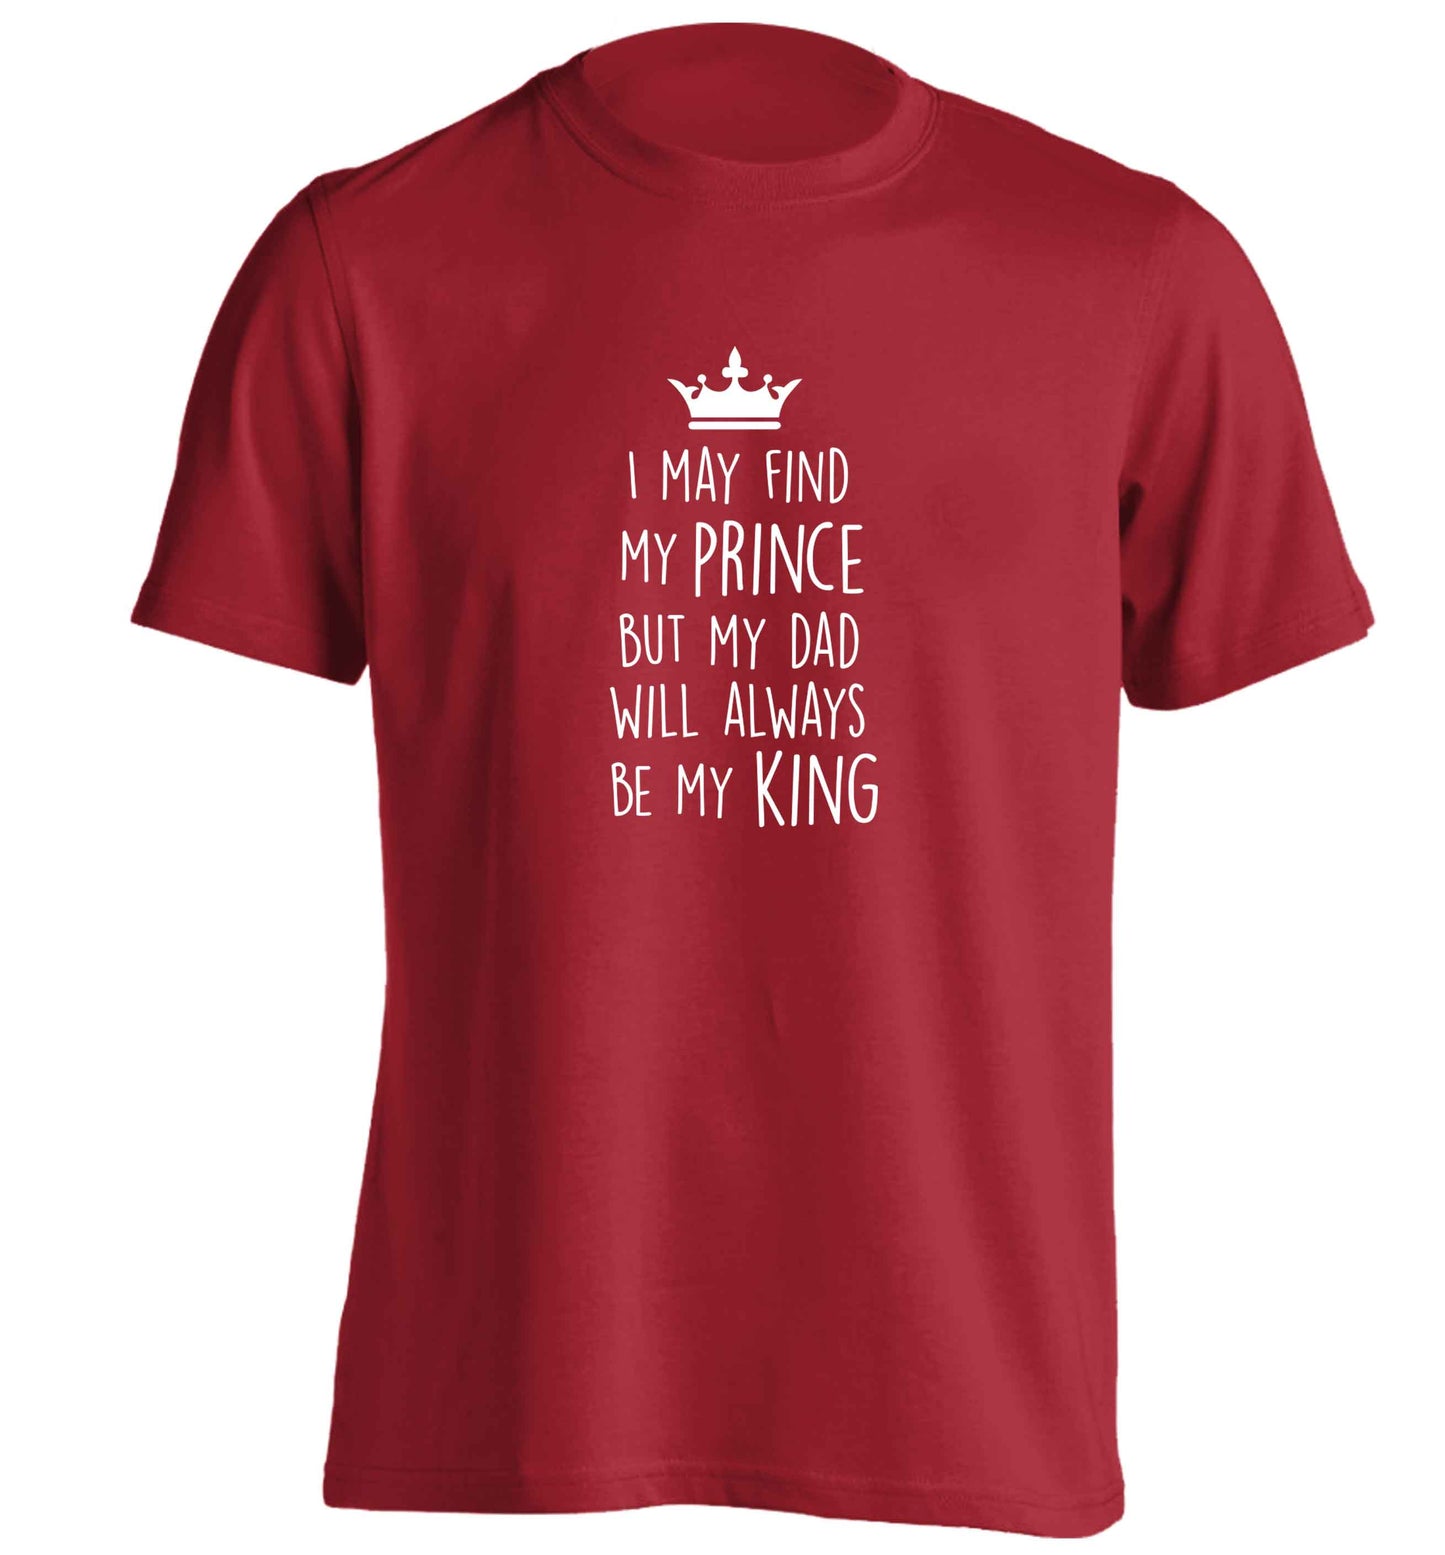 I may find my prince but my dad will always be my king adults unisex red Tshirt 2XL